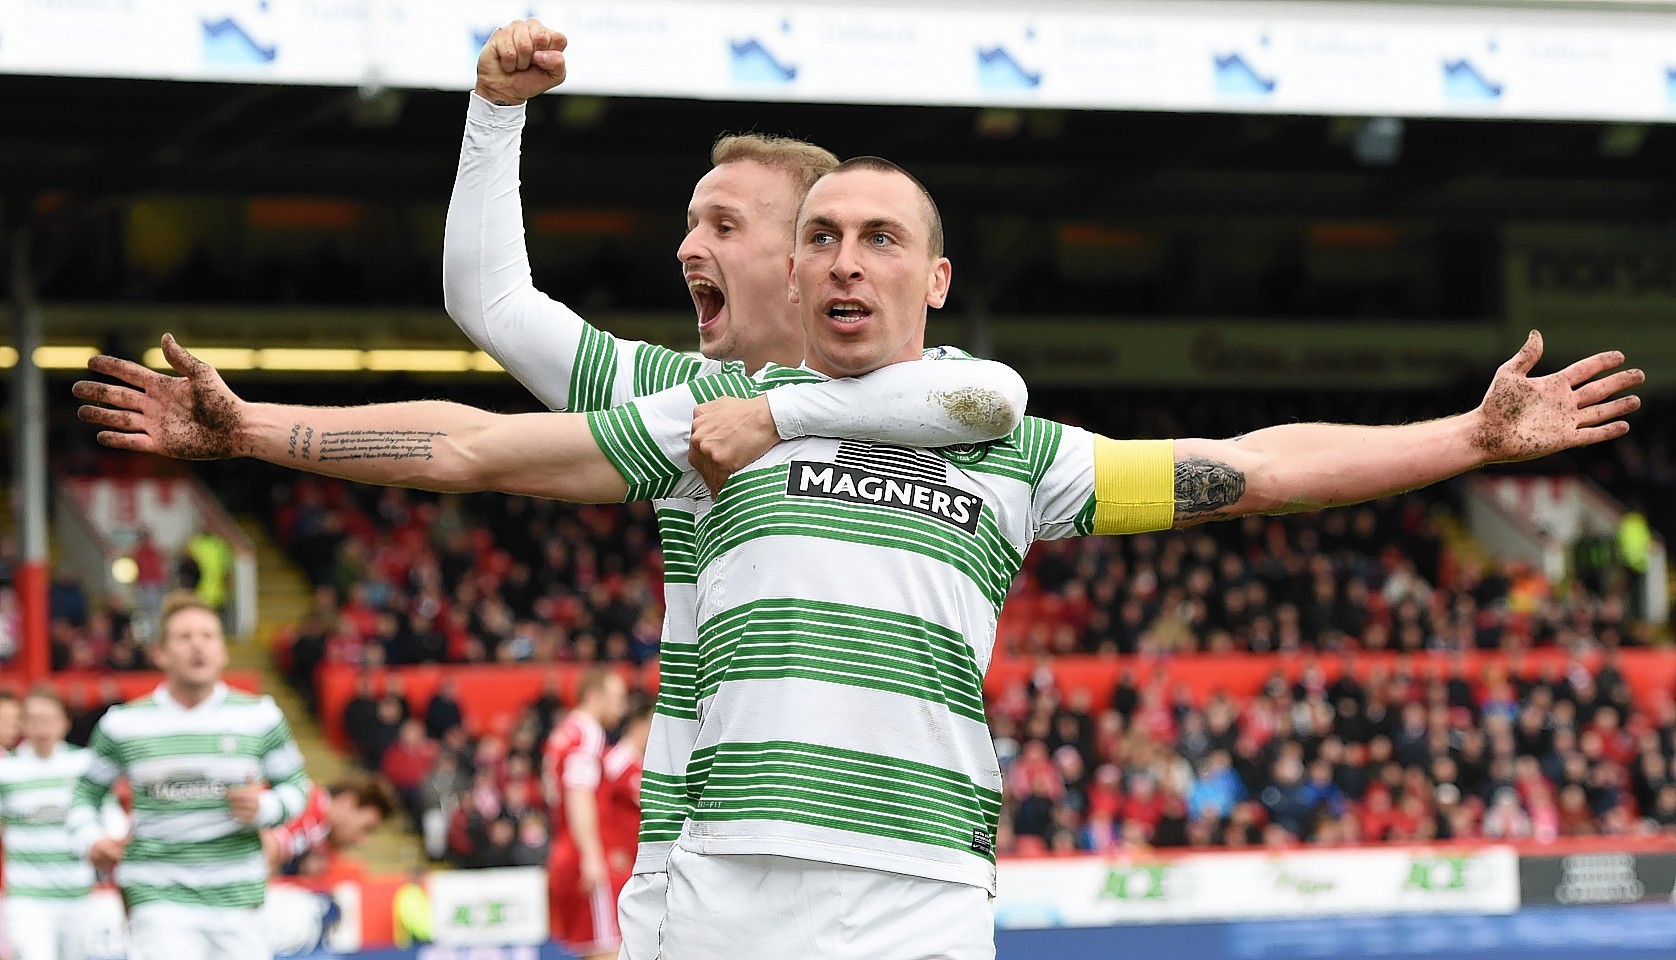 Celtic captain Scott Brown celebrates his goal against the Dons last season with team mate Leigh Griffiths.